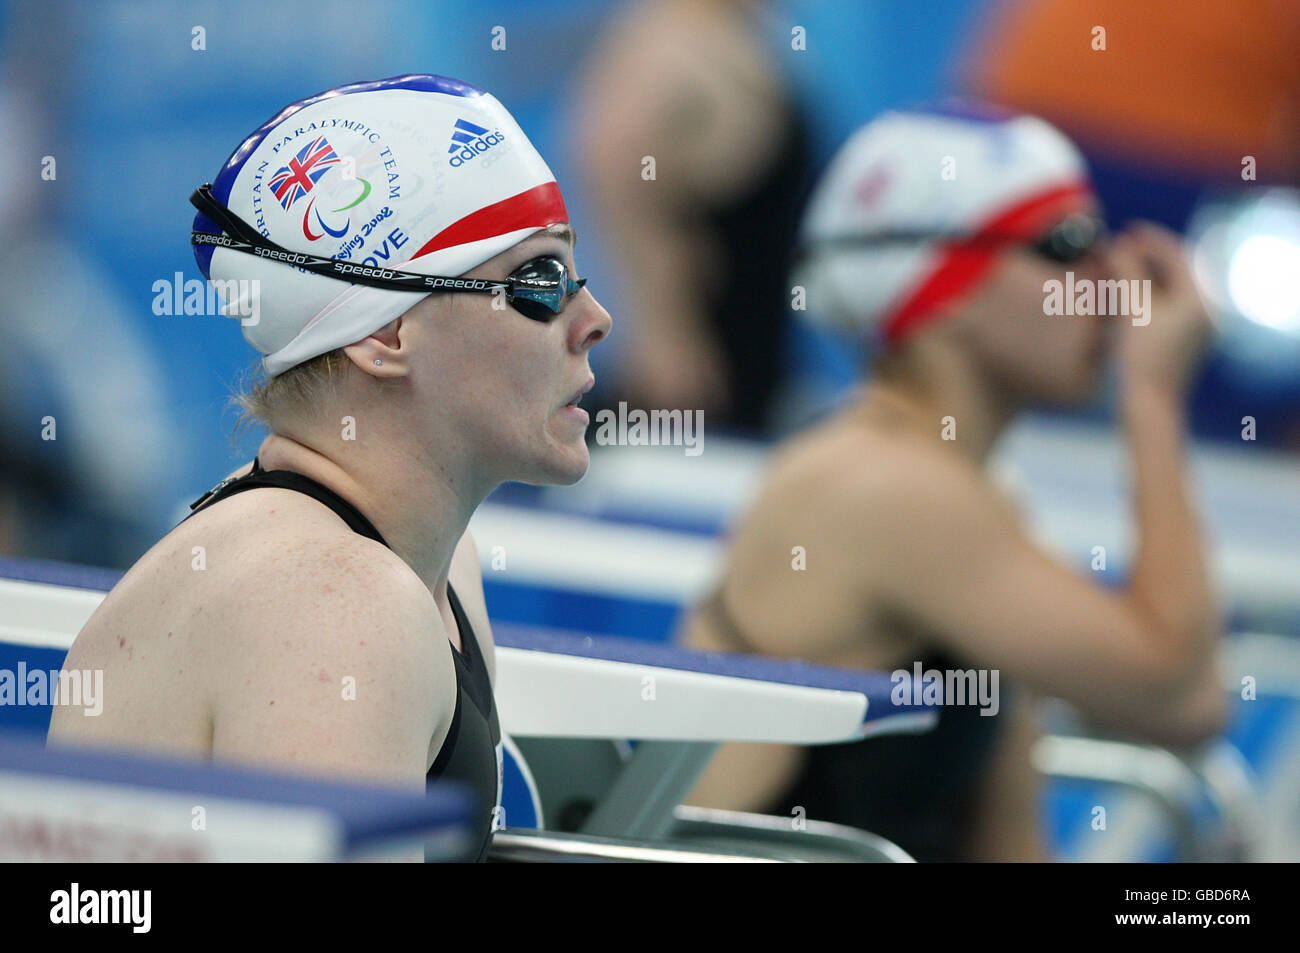 Paralympics - Beijing Paralympic Games 2008 - Day Eight. Great Britain's Mhairi love prepares to start in the Women's 400m Freestyle S6 heat in the National Acquatic Centre, Beijing Stock Photo